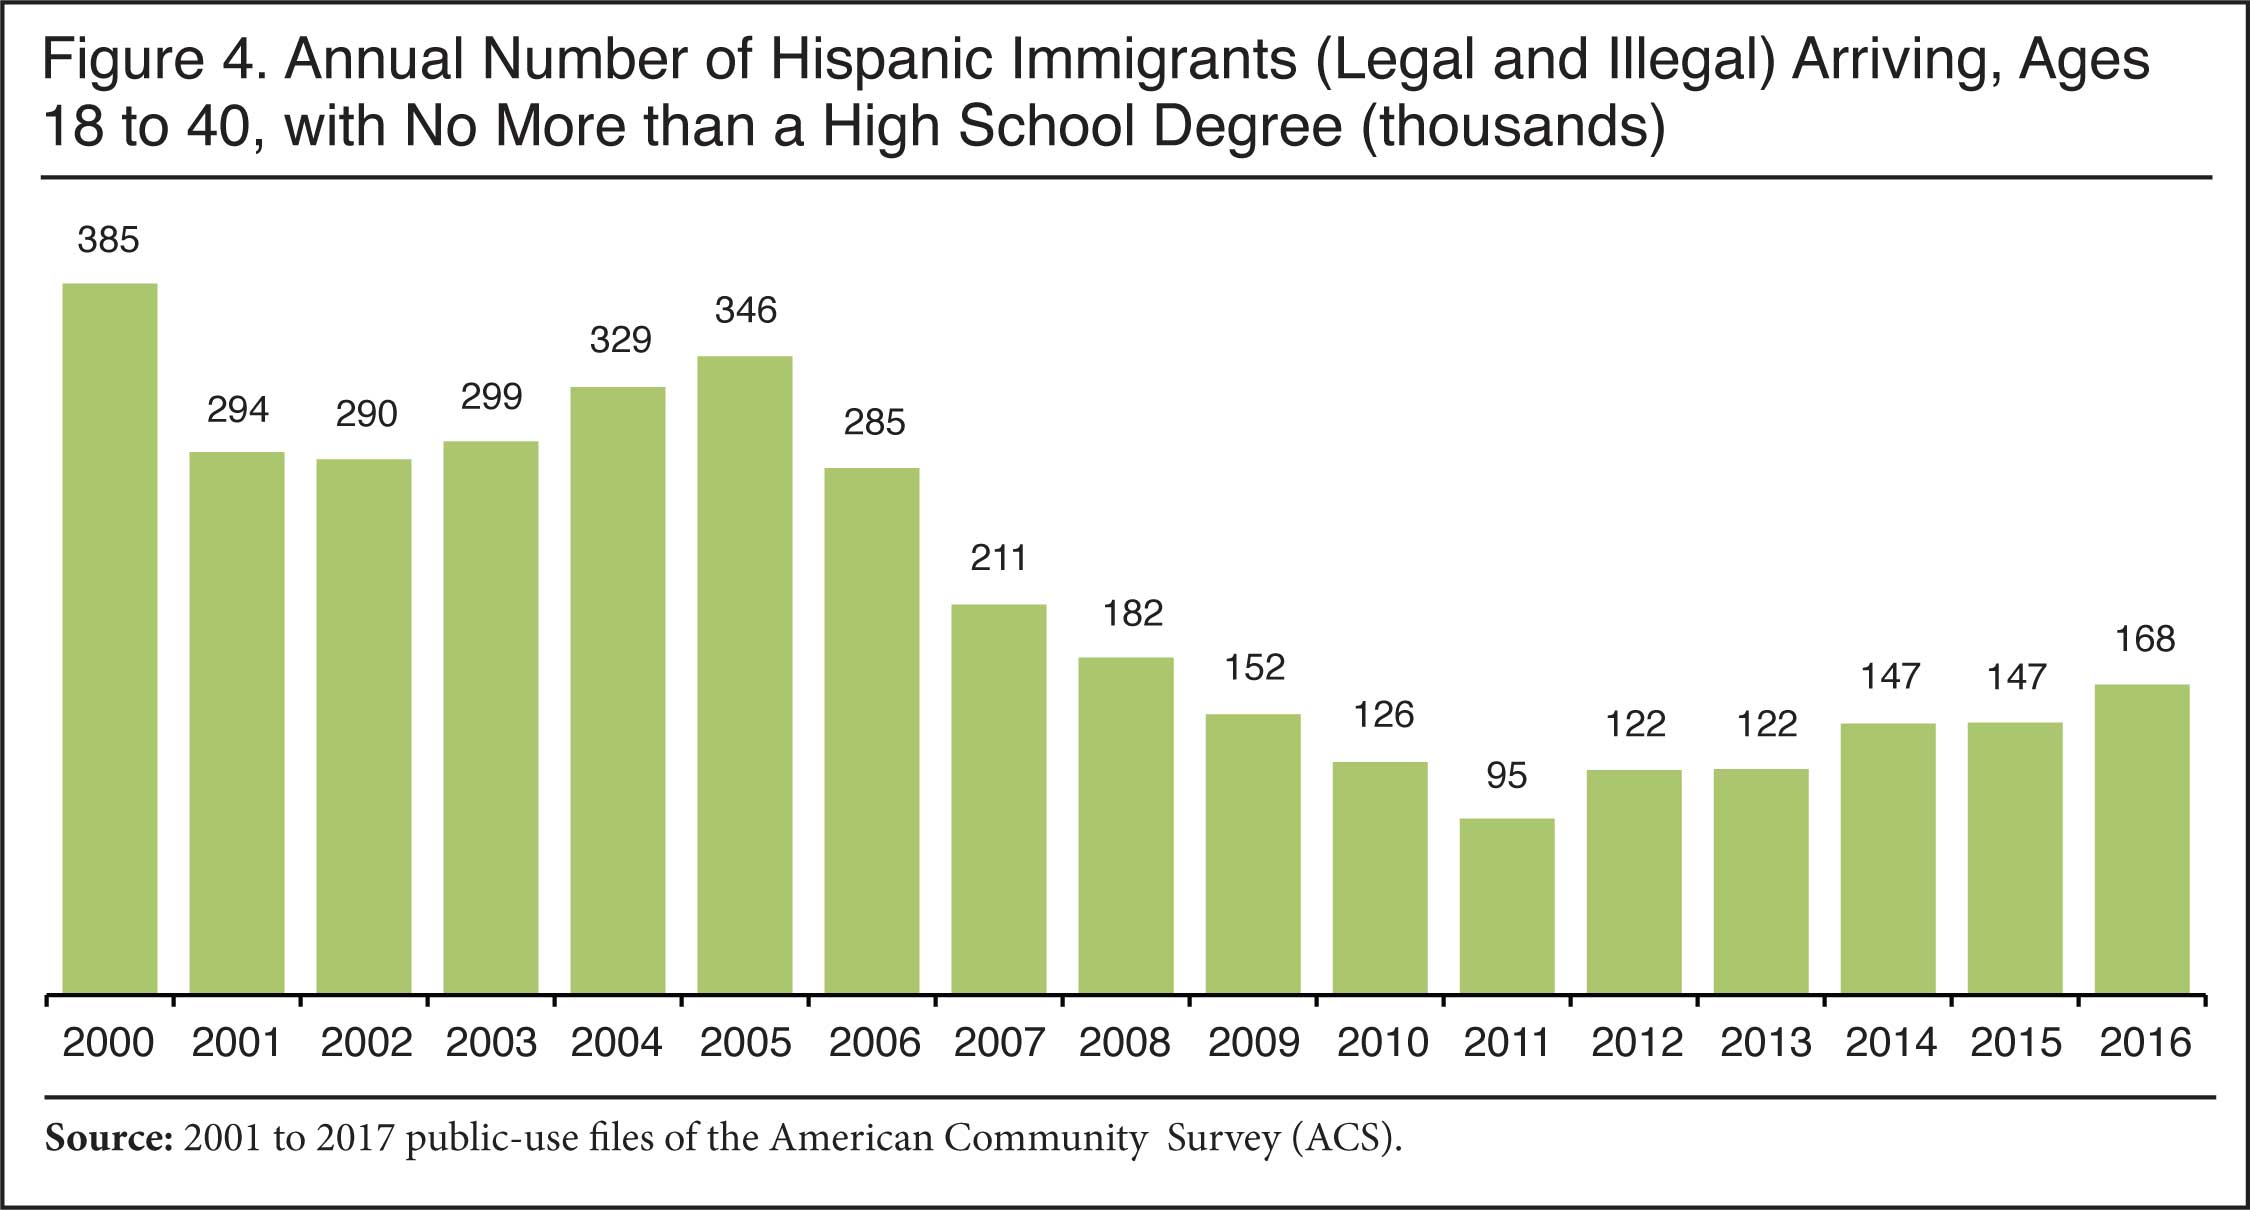 Graph: Annual Number of Hispanic Immigrants Arriving, Ages 18 to 40, with no more than a high school degree